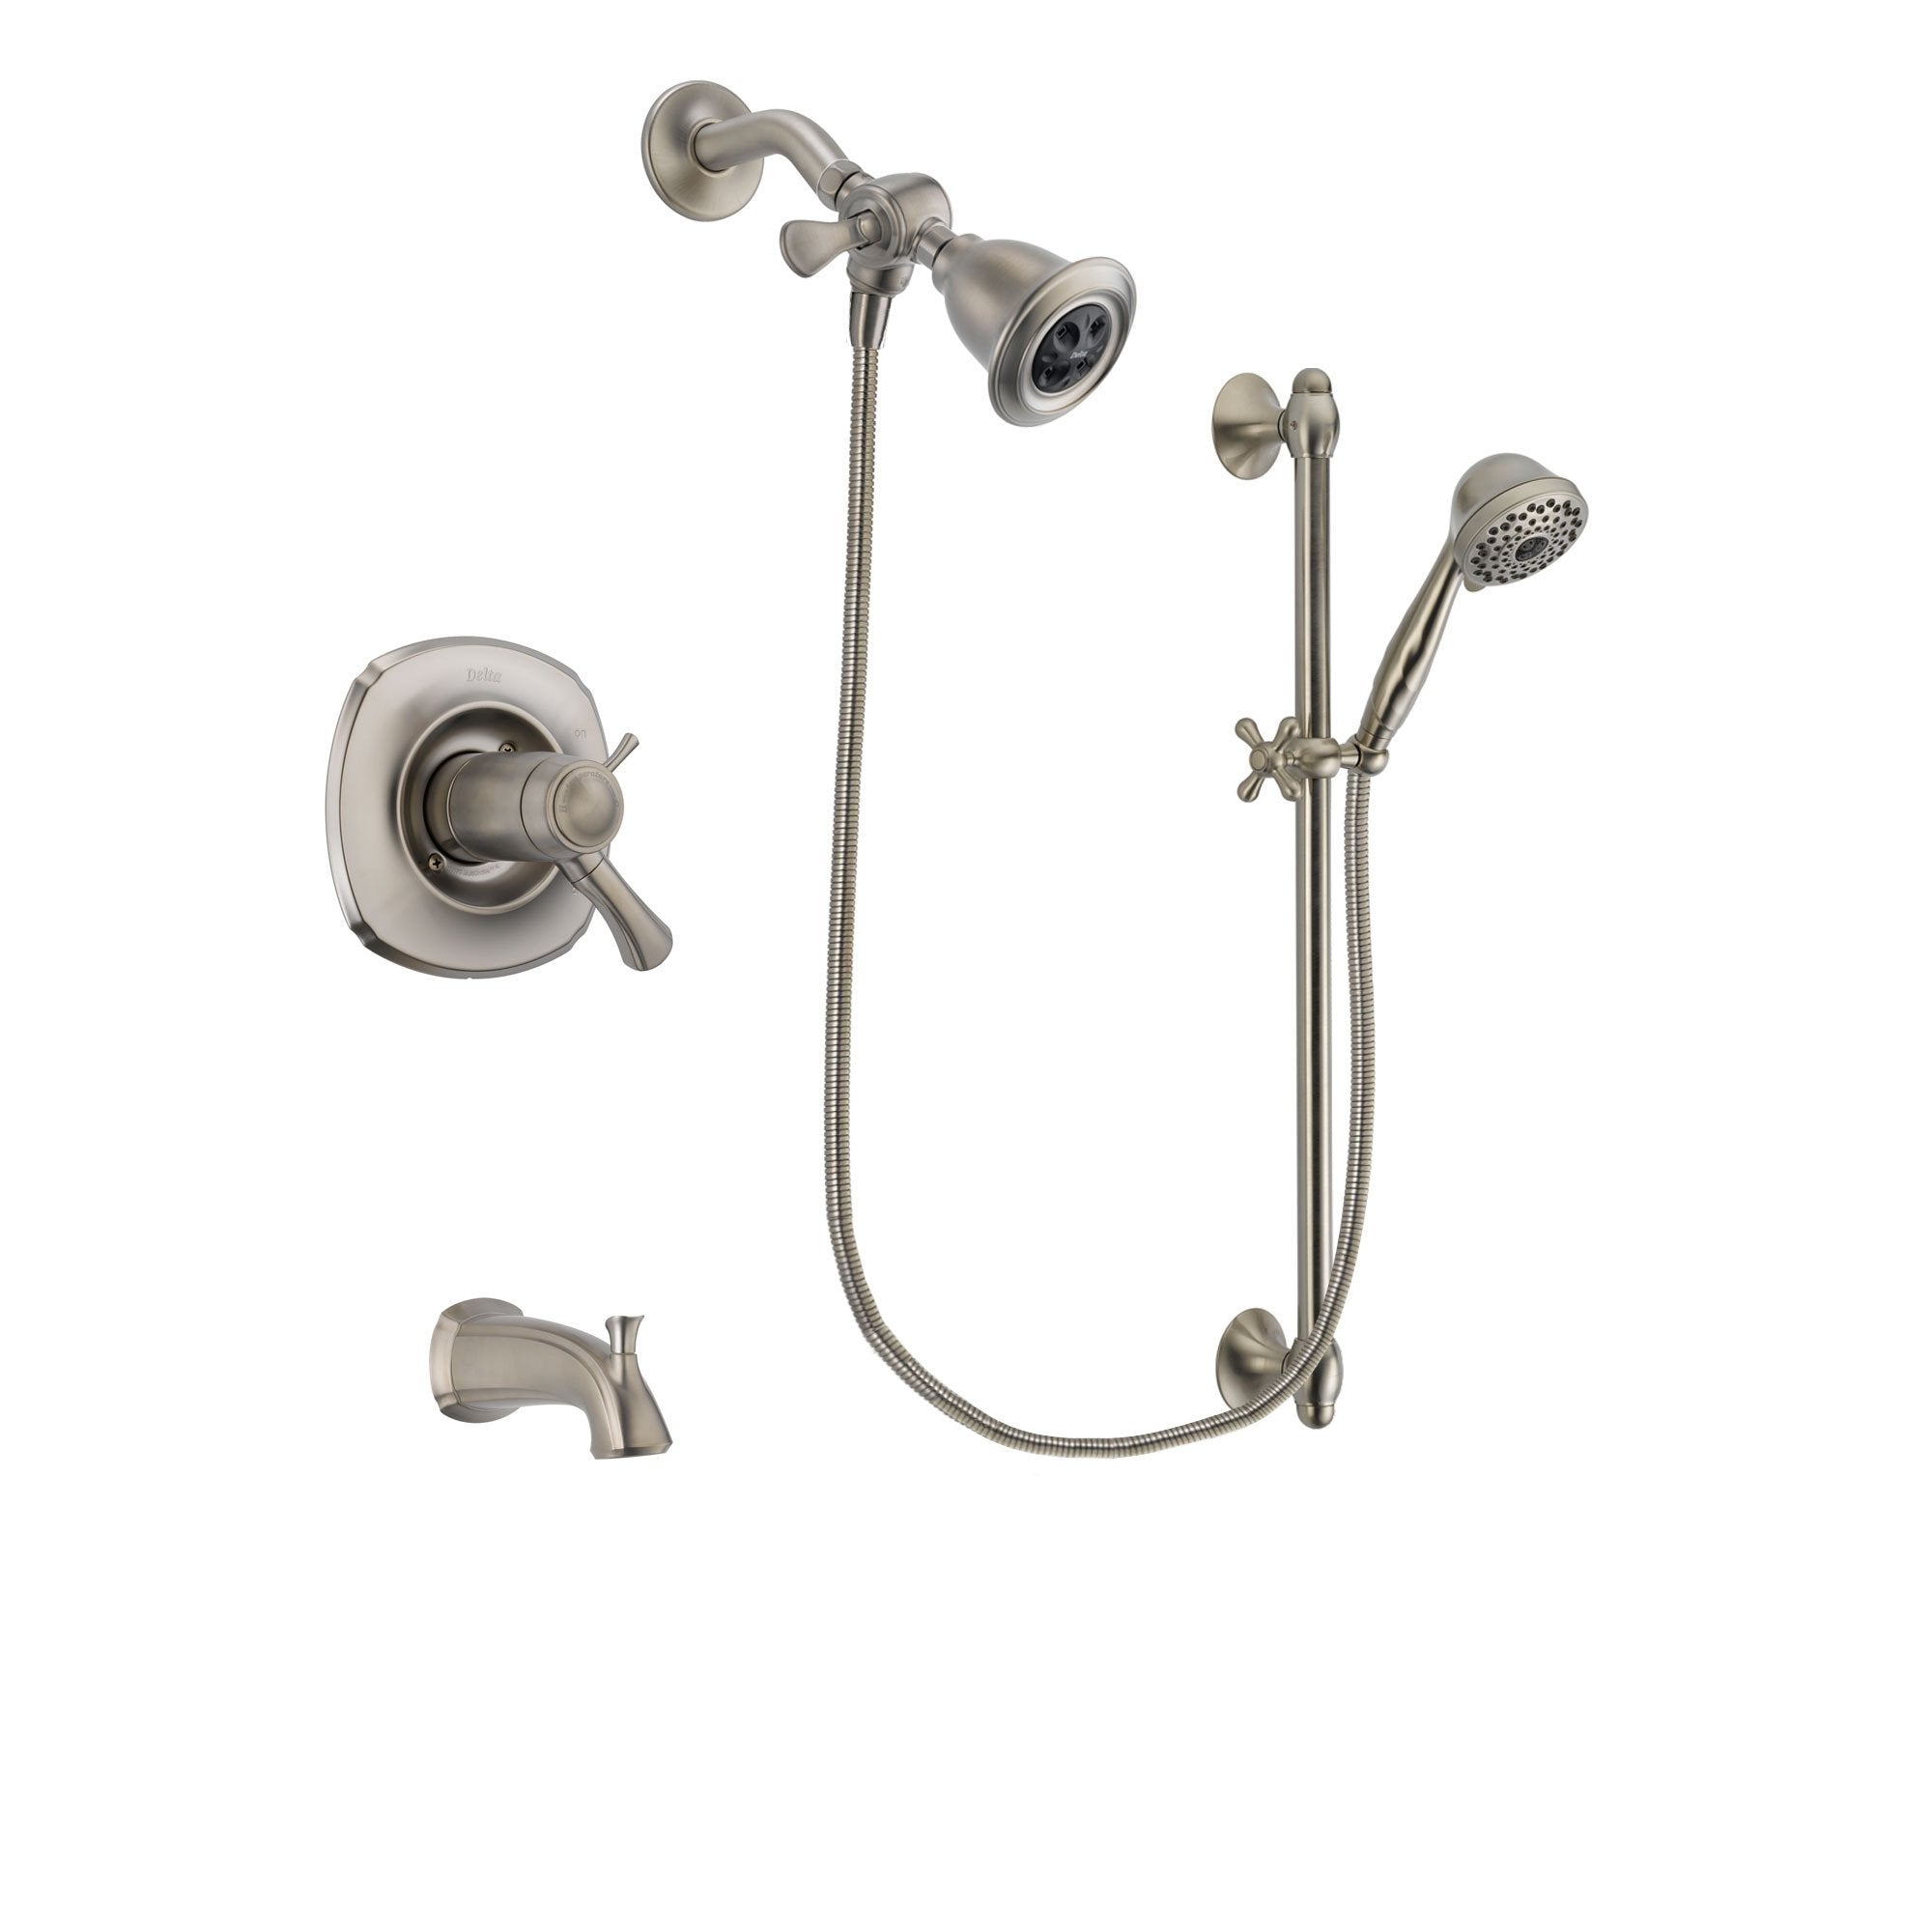 Delta Addison Stainless Steel Finish Thermostatic Tub and Shower Faucet System Package with Water Efficient Showerhead and 7-Spray Handheld Shower with Slide Bar Includes Rough-in Valve and Tub Spout DSP1689V